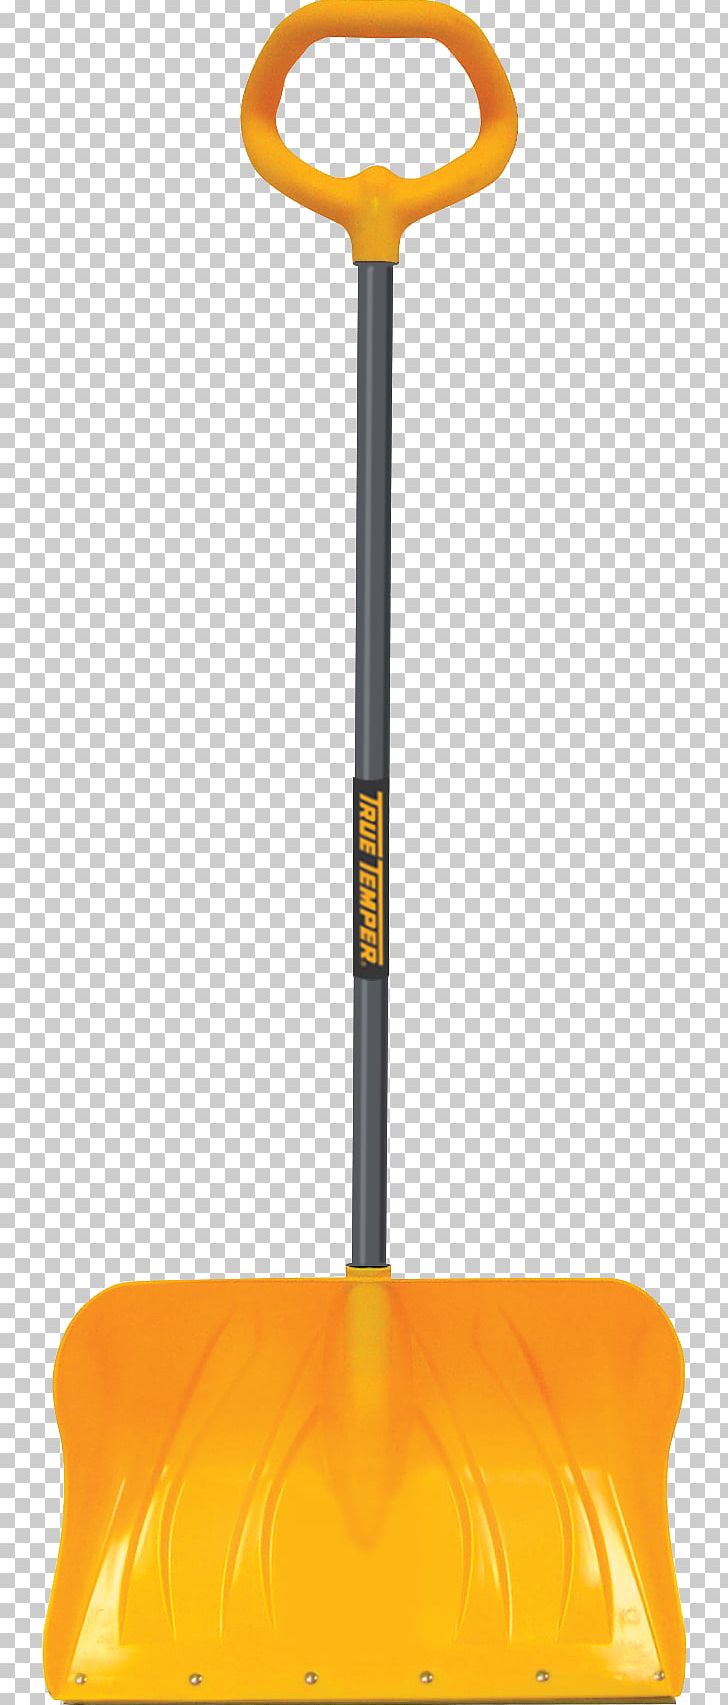 Snow Shovel The Ames Companies Inc Tool PNG, Clipart, Ames Companies Inc, Garden, Handle, Hardware, Inch Free PNG Download